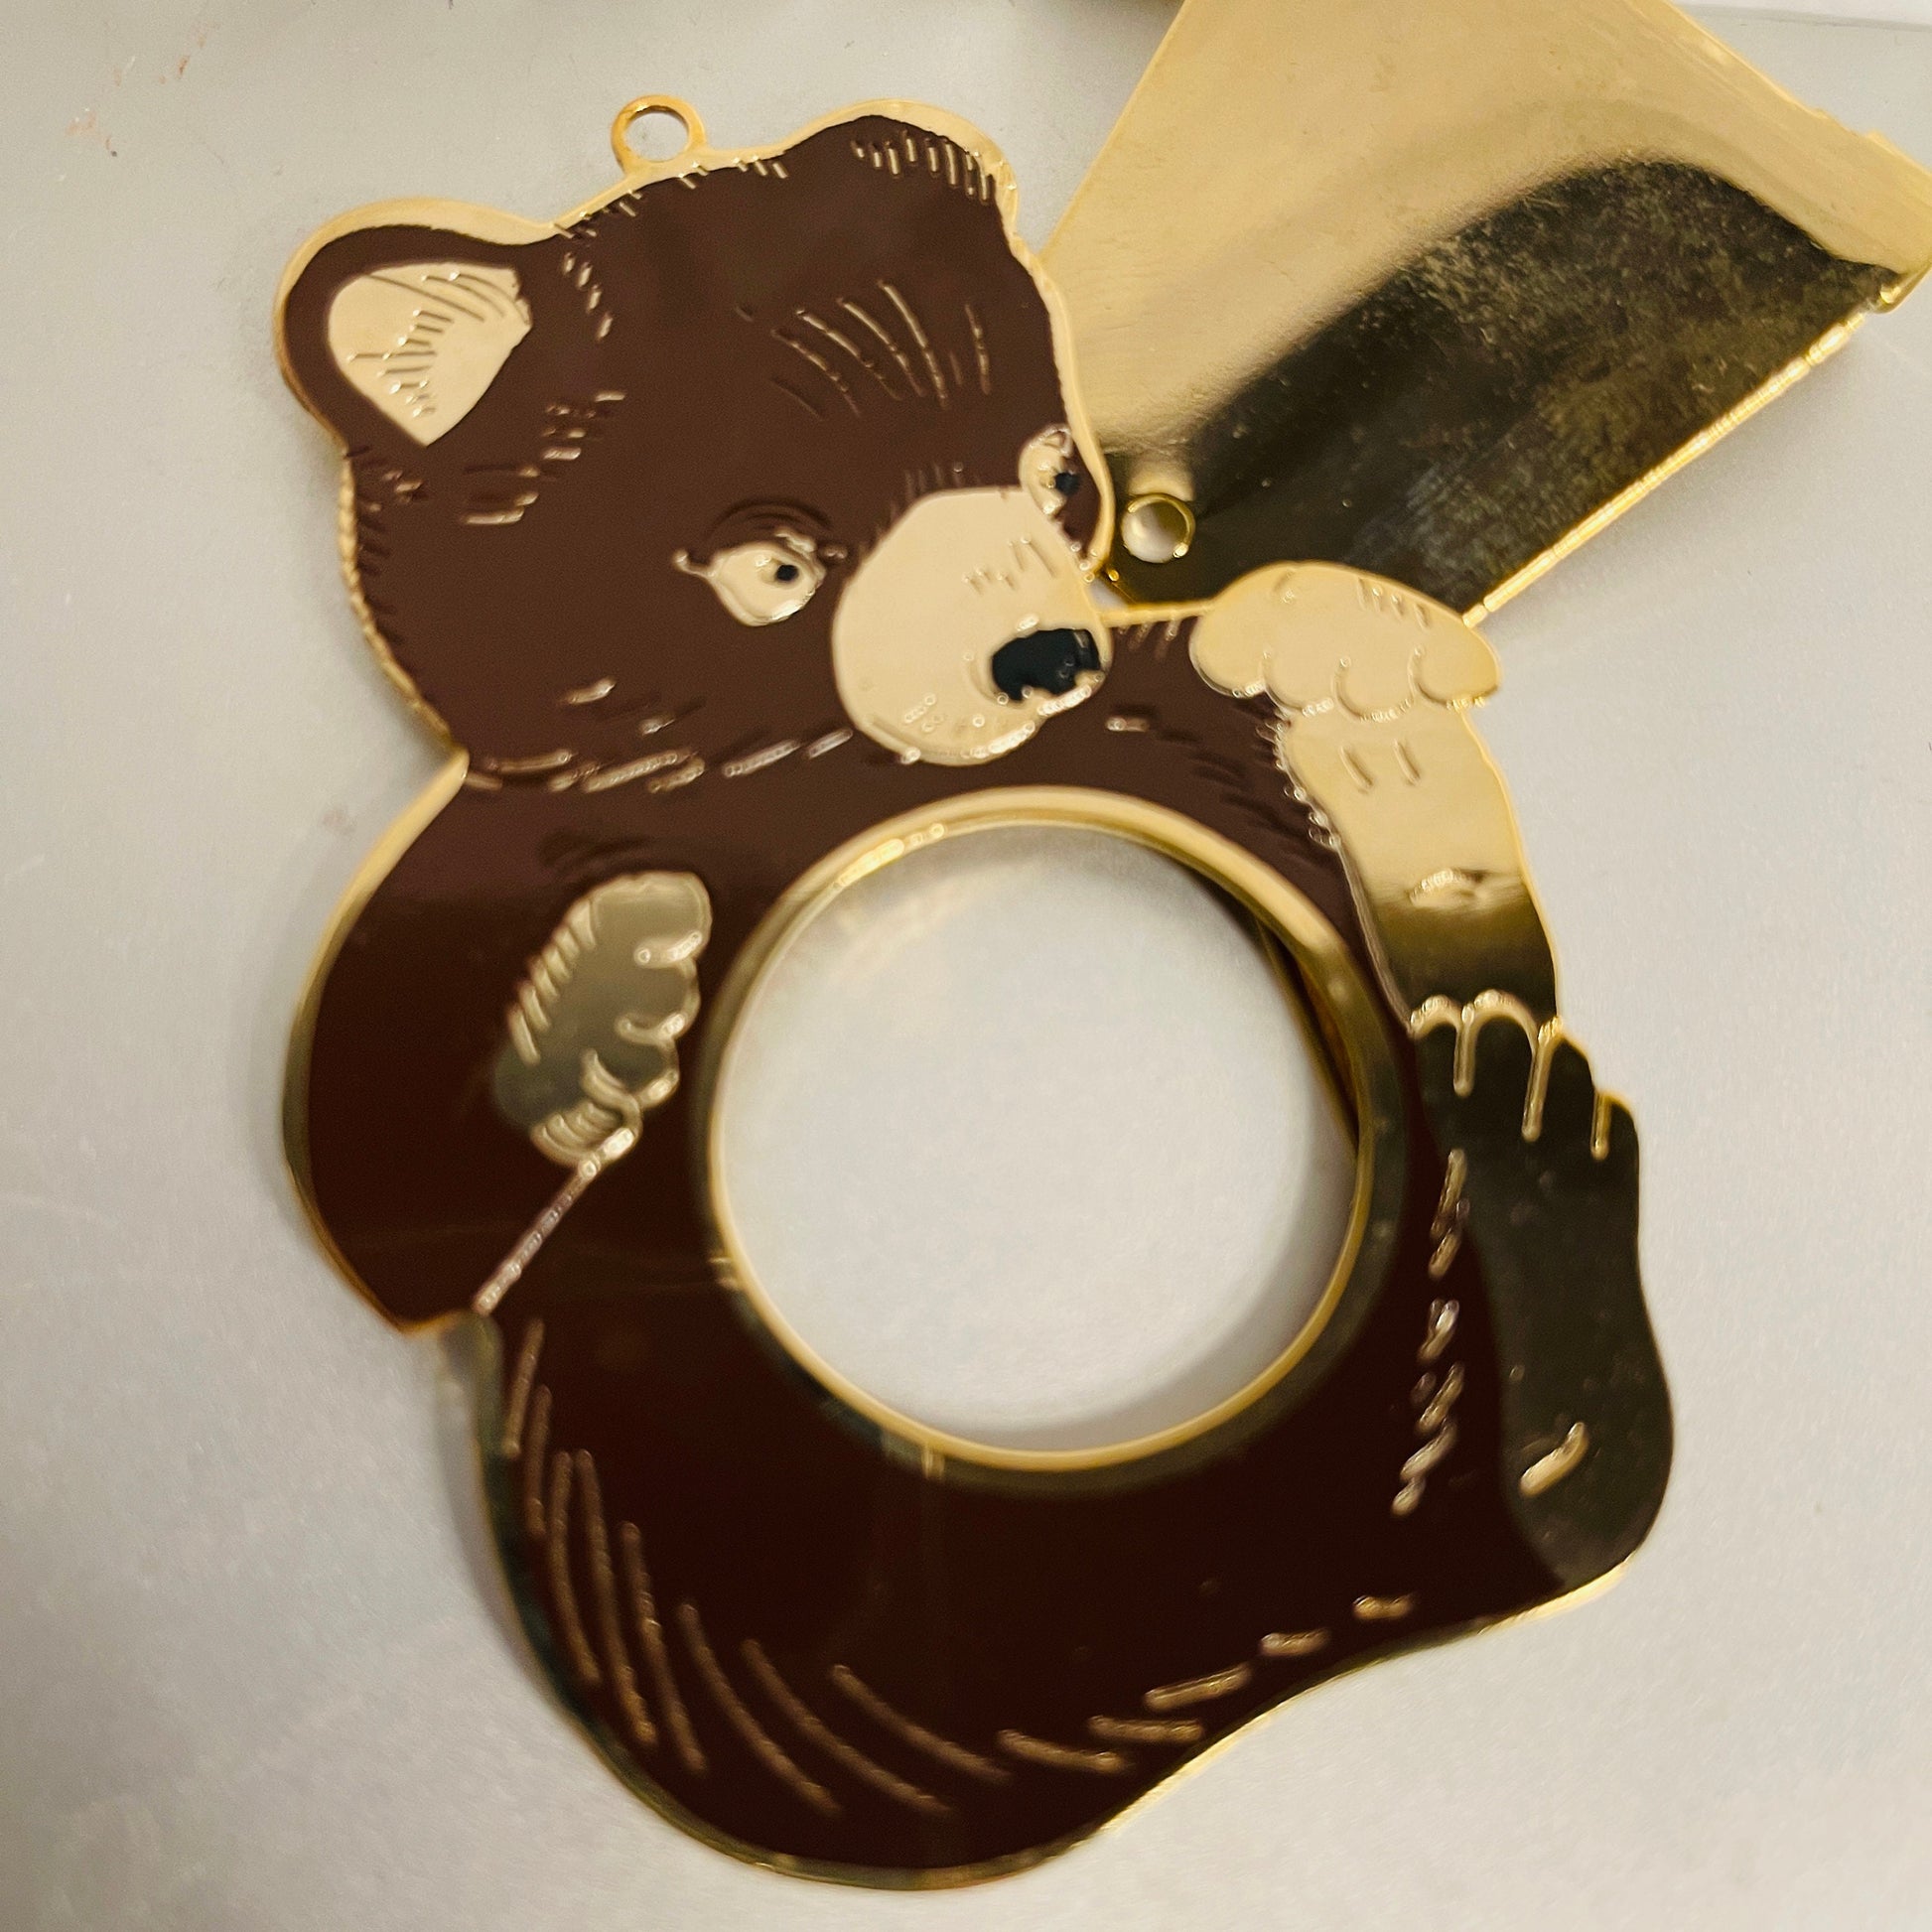 Teddy Bear Or Red Heart, Choice of Gold-Tone Metal Mini Picture Frame Ornaments with Stand